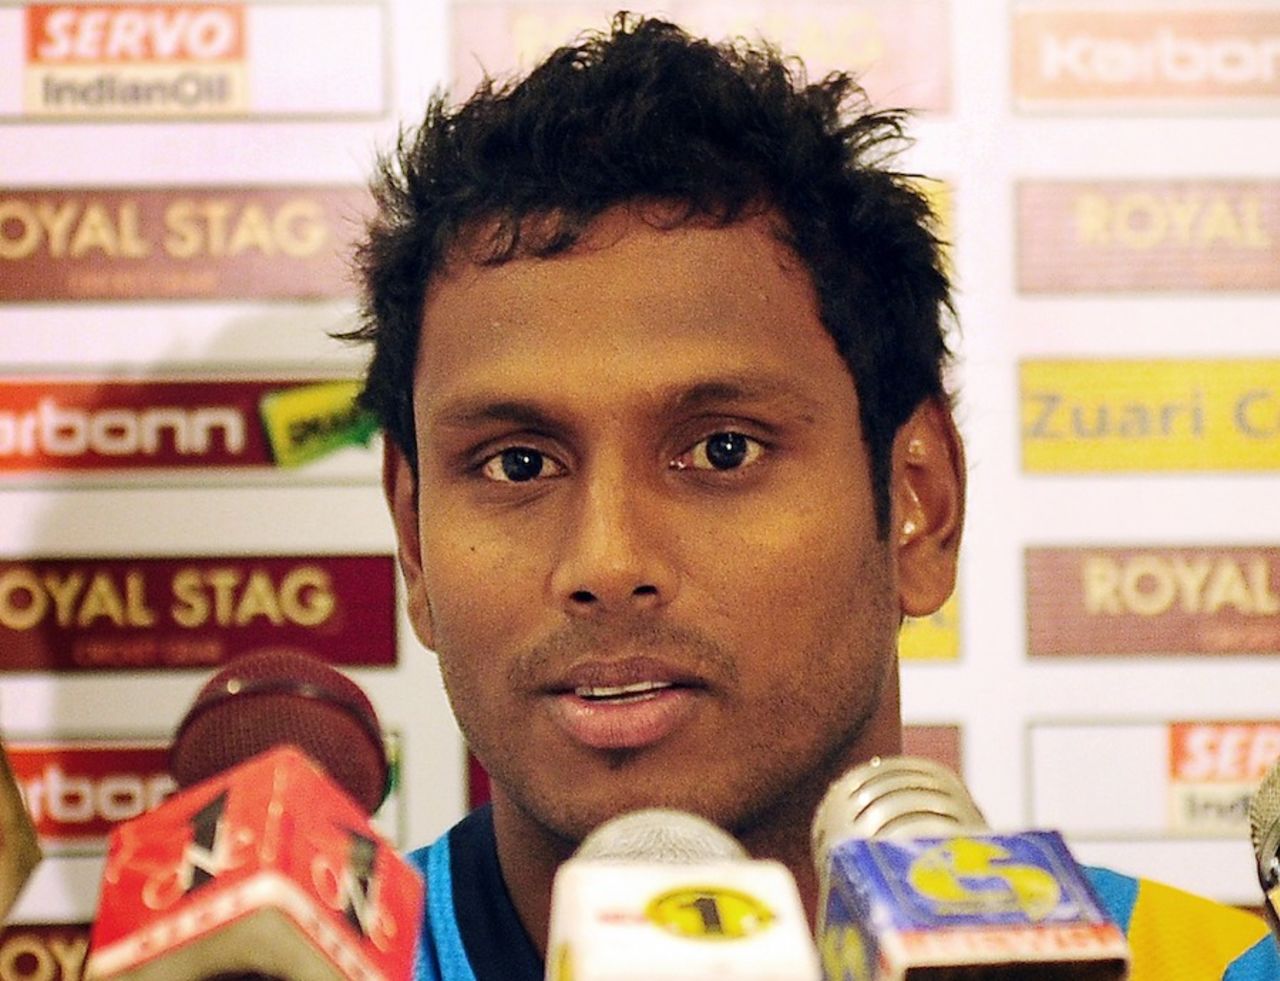 Angelo Mathews at a press conference, Pallekele, October 29, 2012